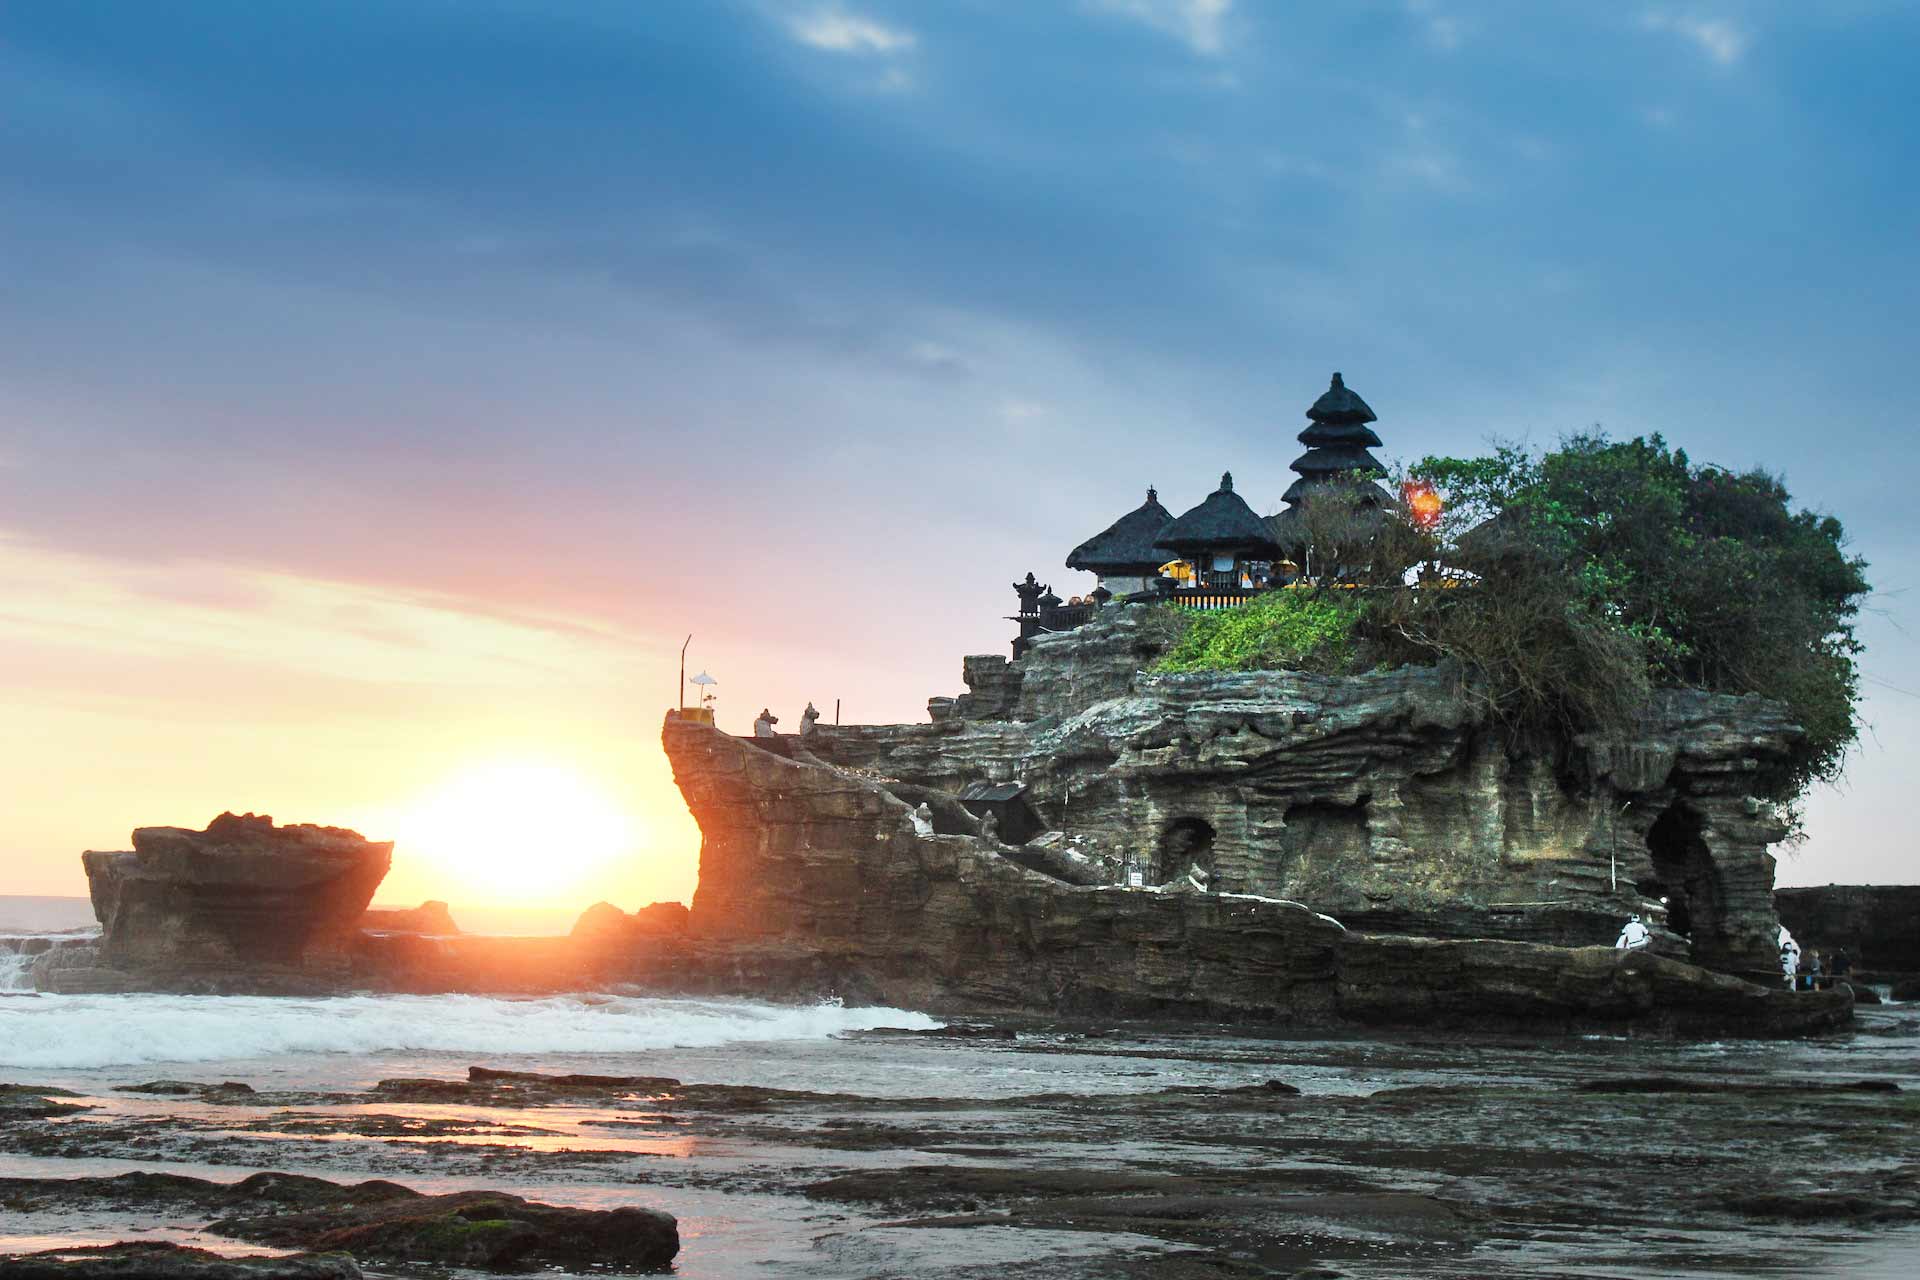 Temple in Bali well known for the sunset, Bali, Indonesia